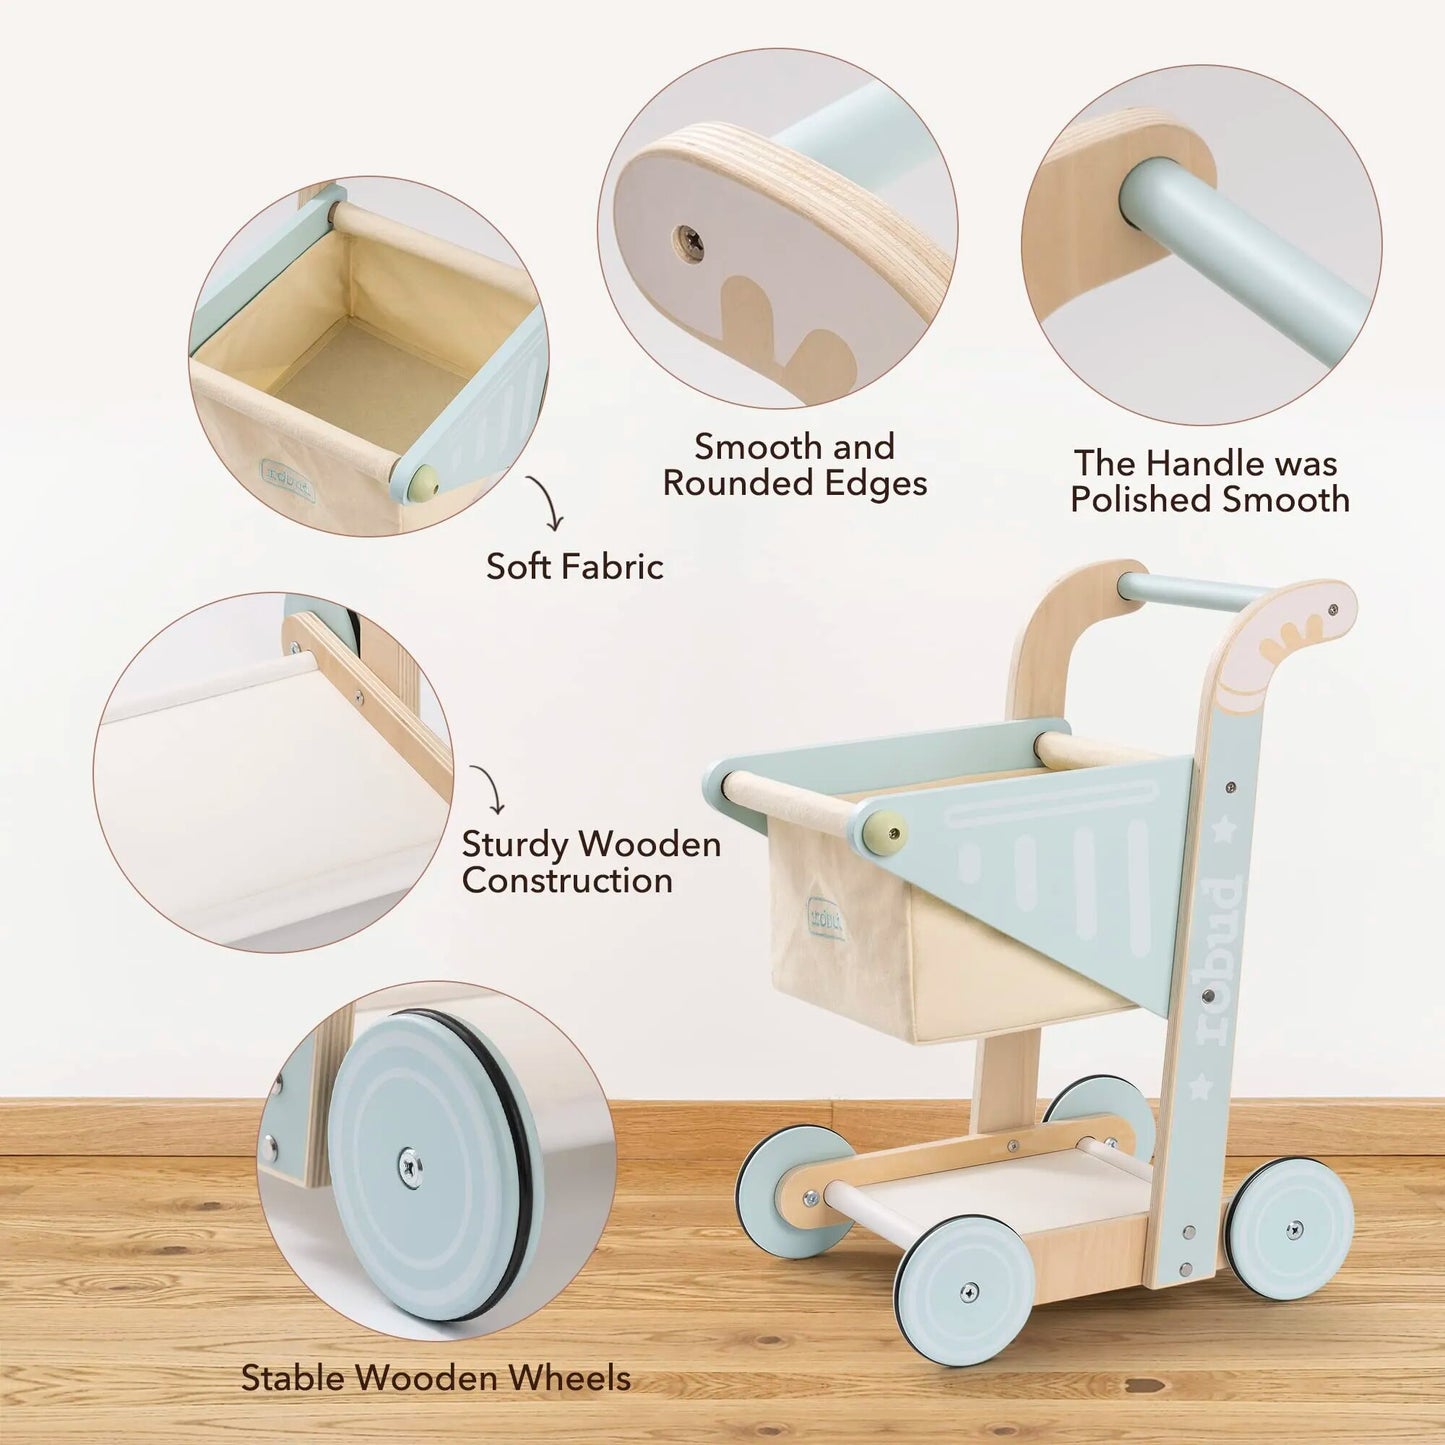 Robud Wooden Baby Push Walker Toy, Kids Shopping Cart Toy, Push Toy for Babies Learning to Walk for Toddler Doll Stroller